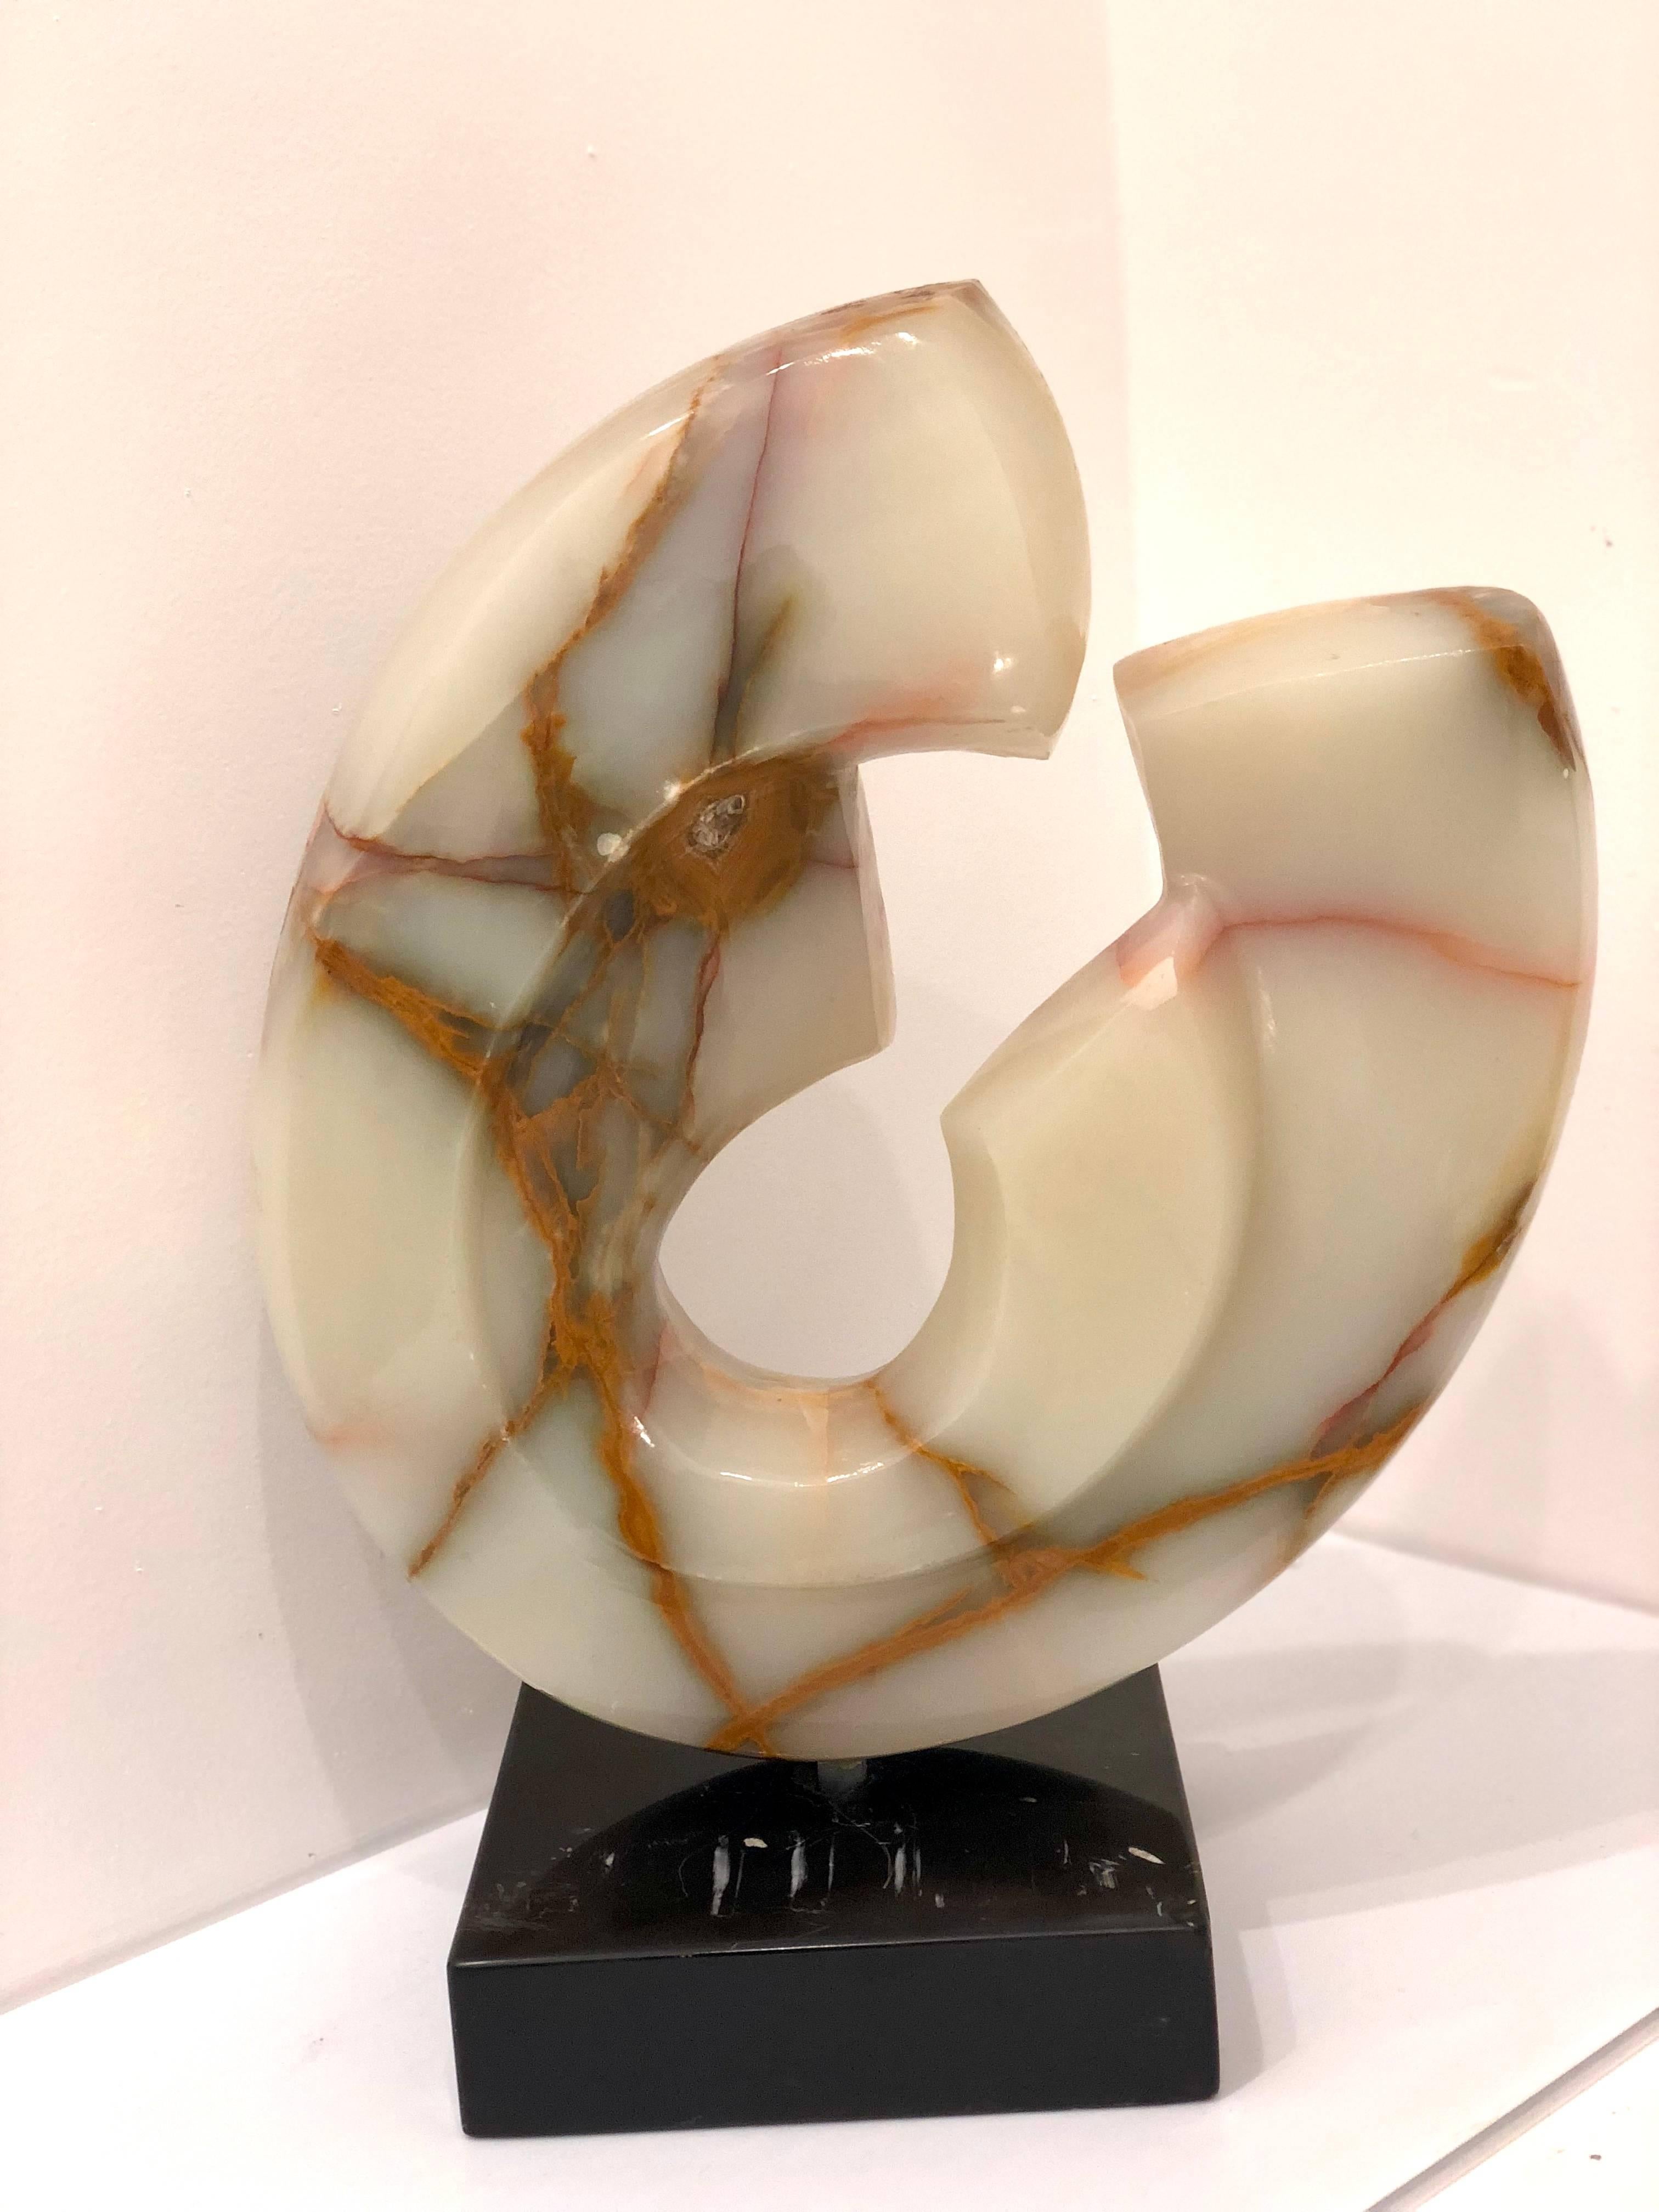 American Modernist Abstract Carved Onyx Sculpture on Black Marble Base